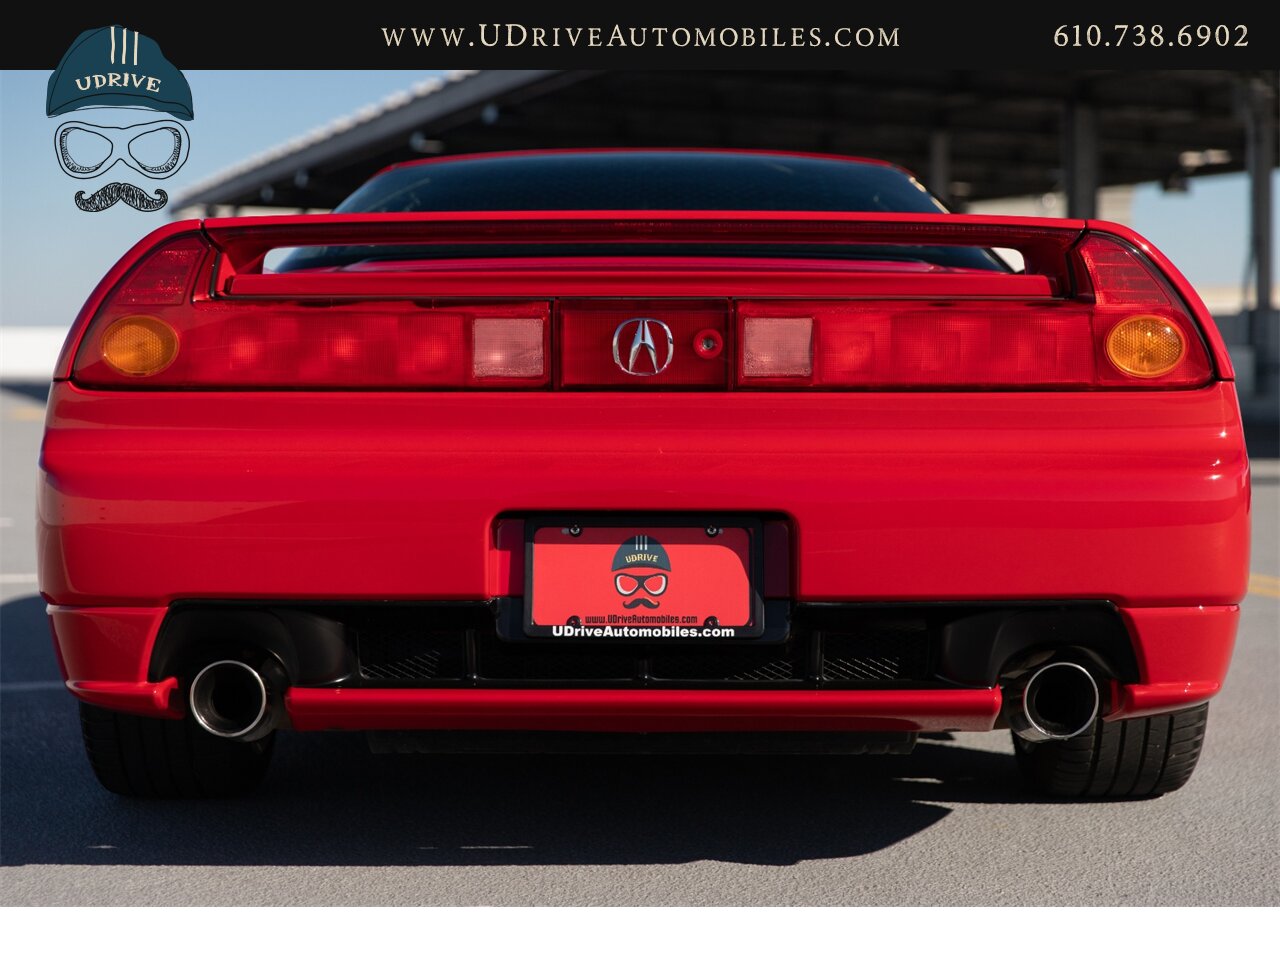 2004 Acura NSX NSX-T 21k mIles Red over Black  Fresh Timing Belt Service - Photo 20 - West Chester, PA 19382